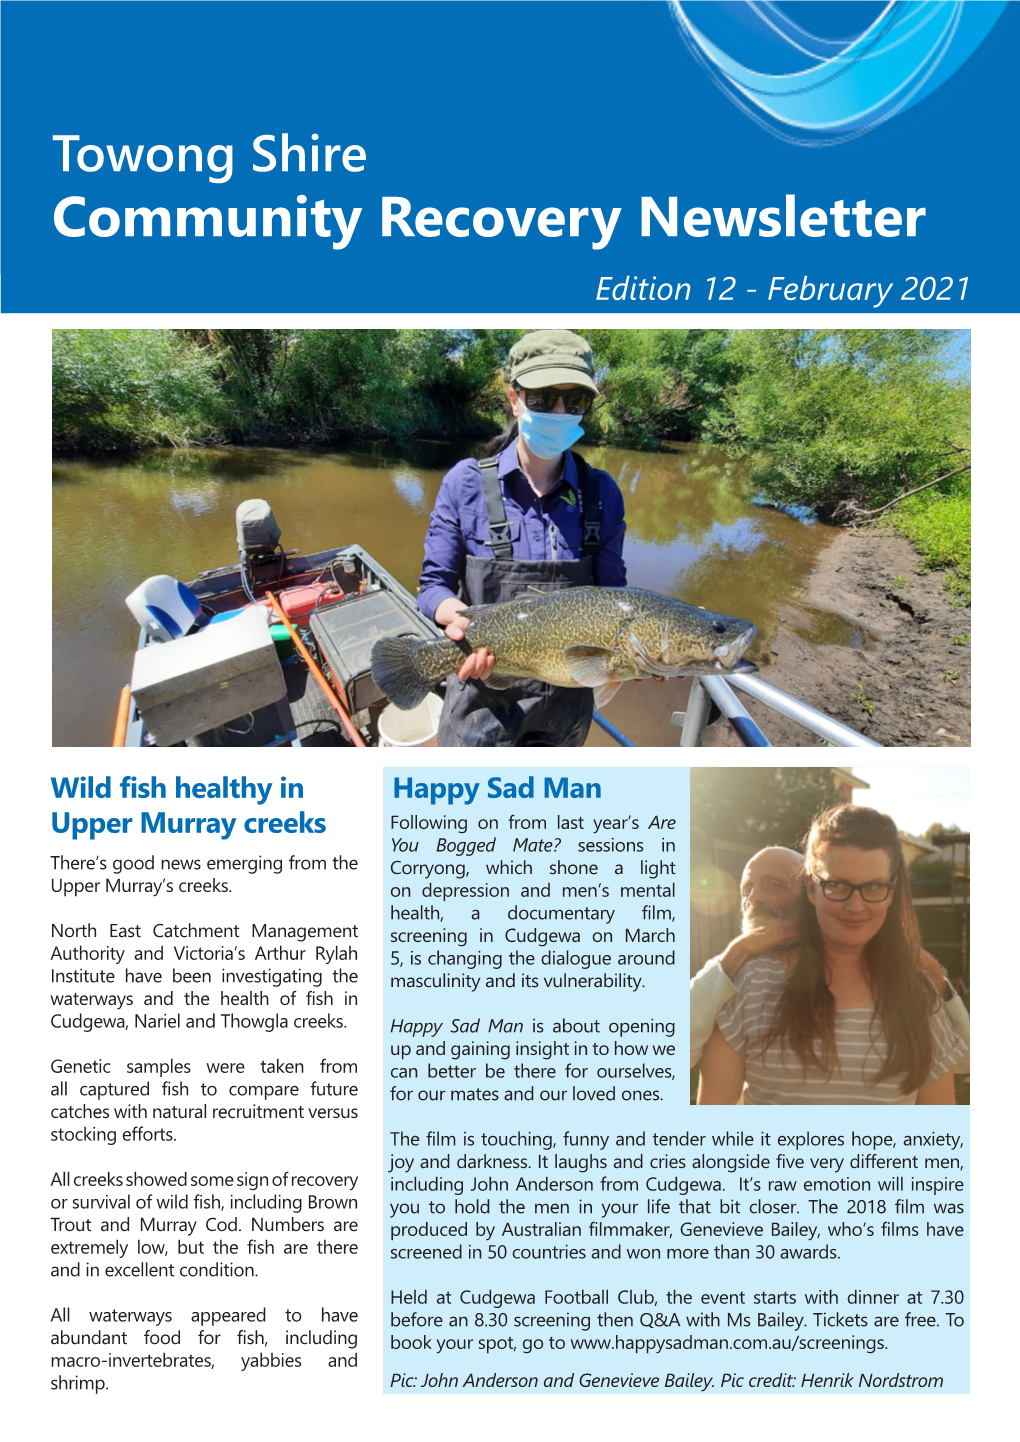 Towong Shire Community Recovery Newsletter Edition 12 - February 2021